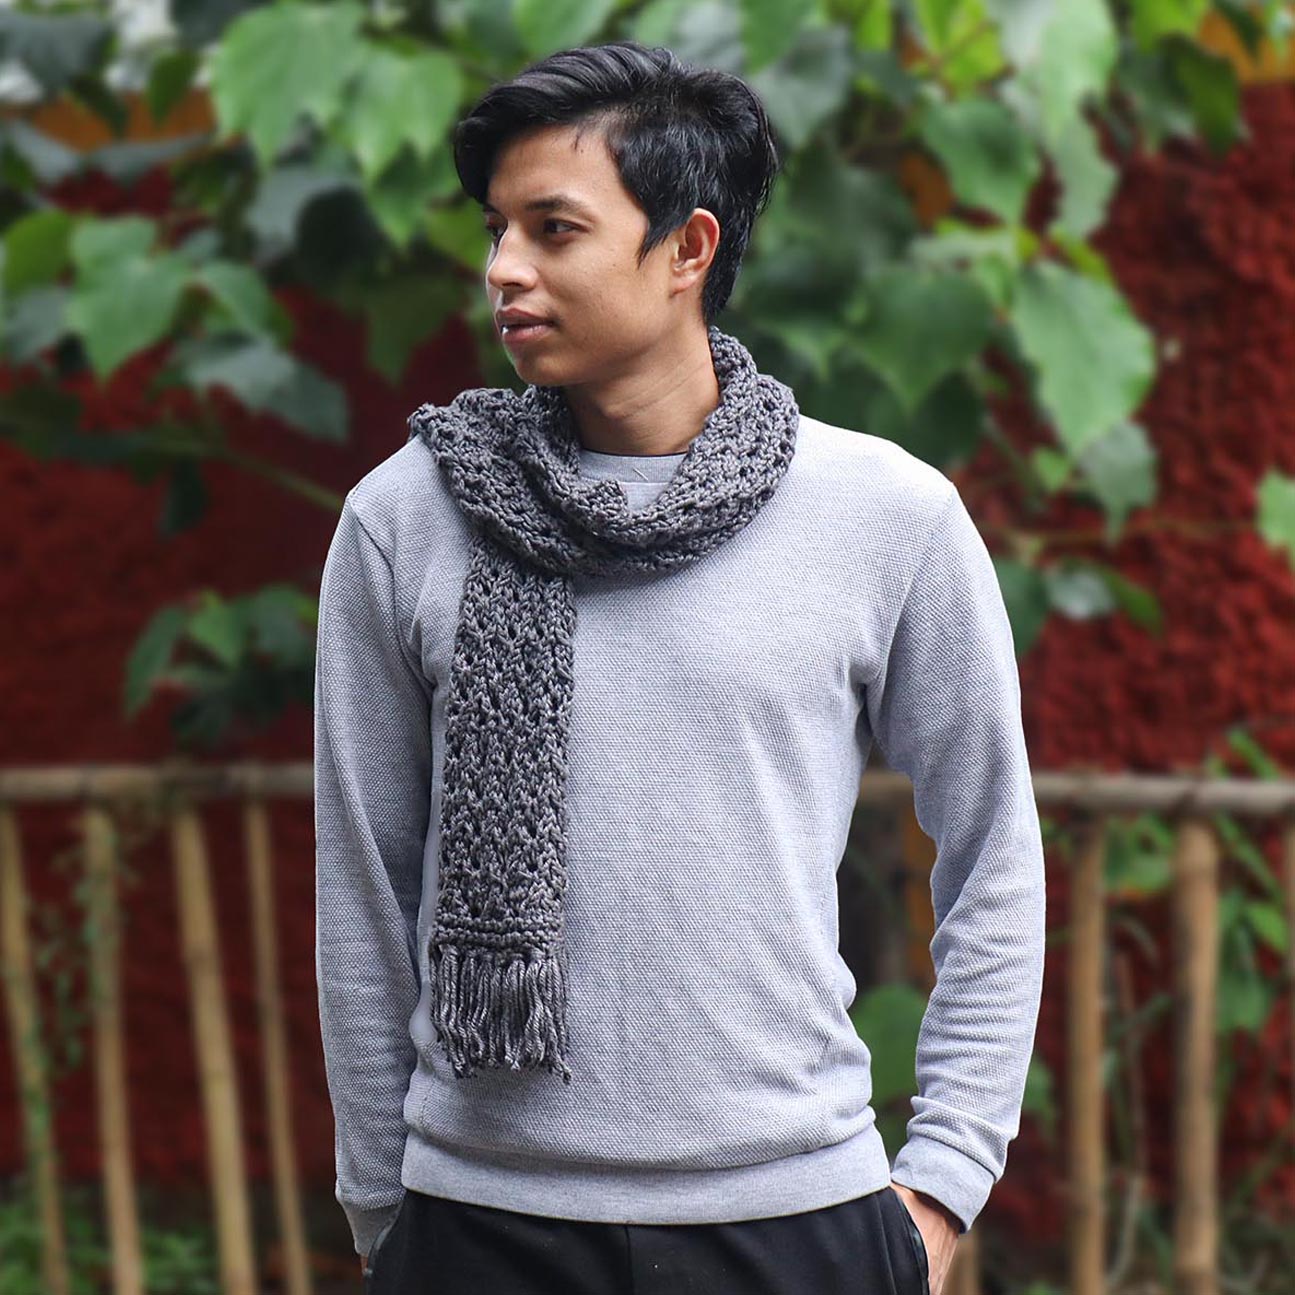 This is a Grey Muffler For men made from Eri Silk - Download This Knitting Pattern From Muezart India